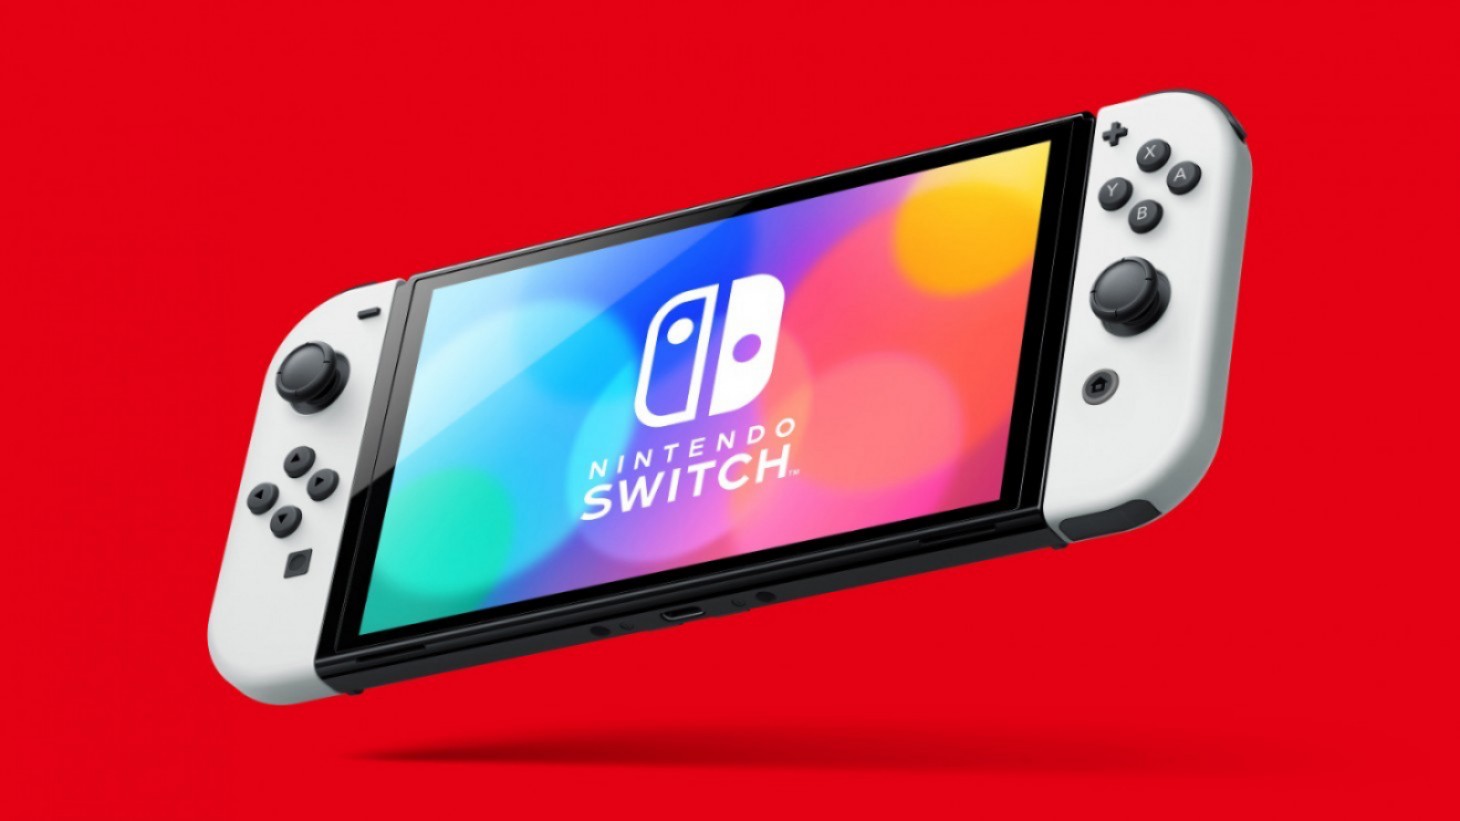 It's Official, Total Switch Sales Have Now Surpassed The Game Boy